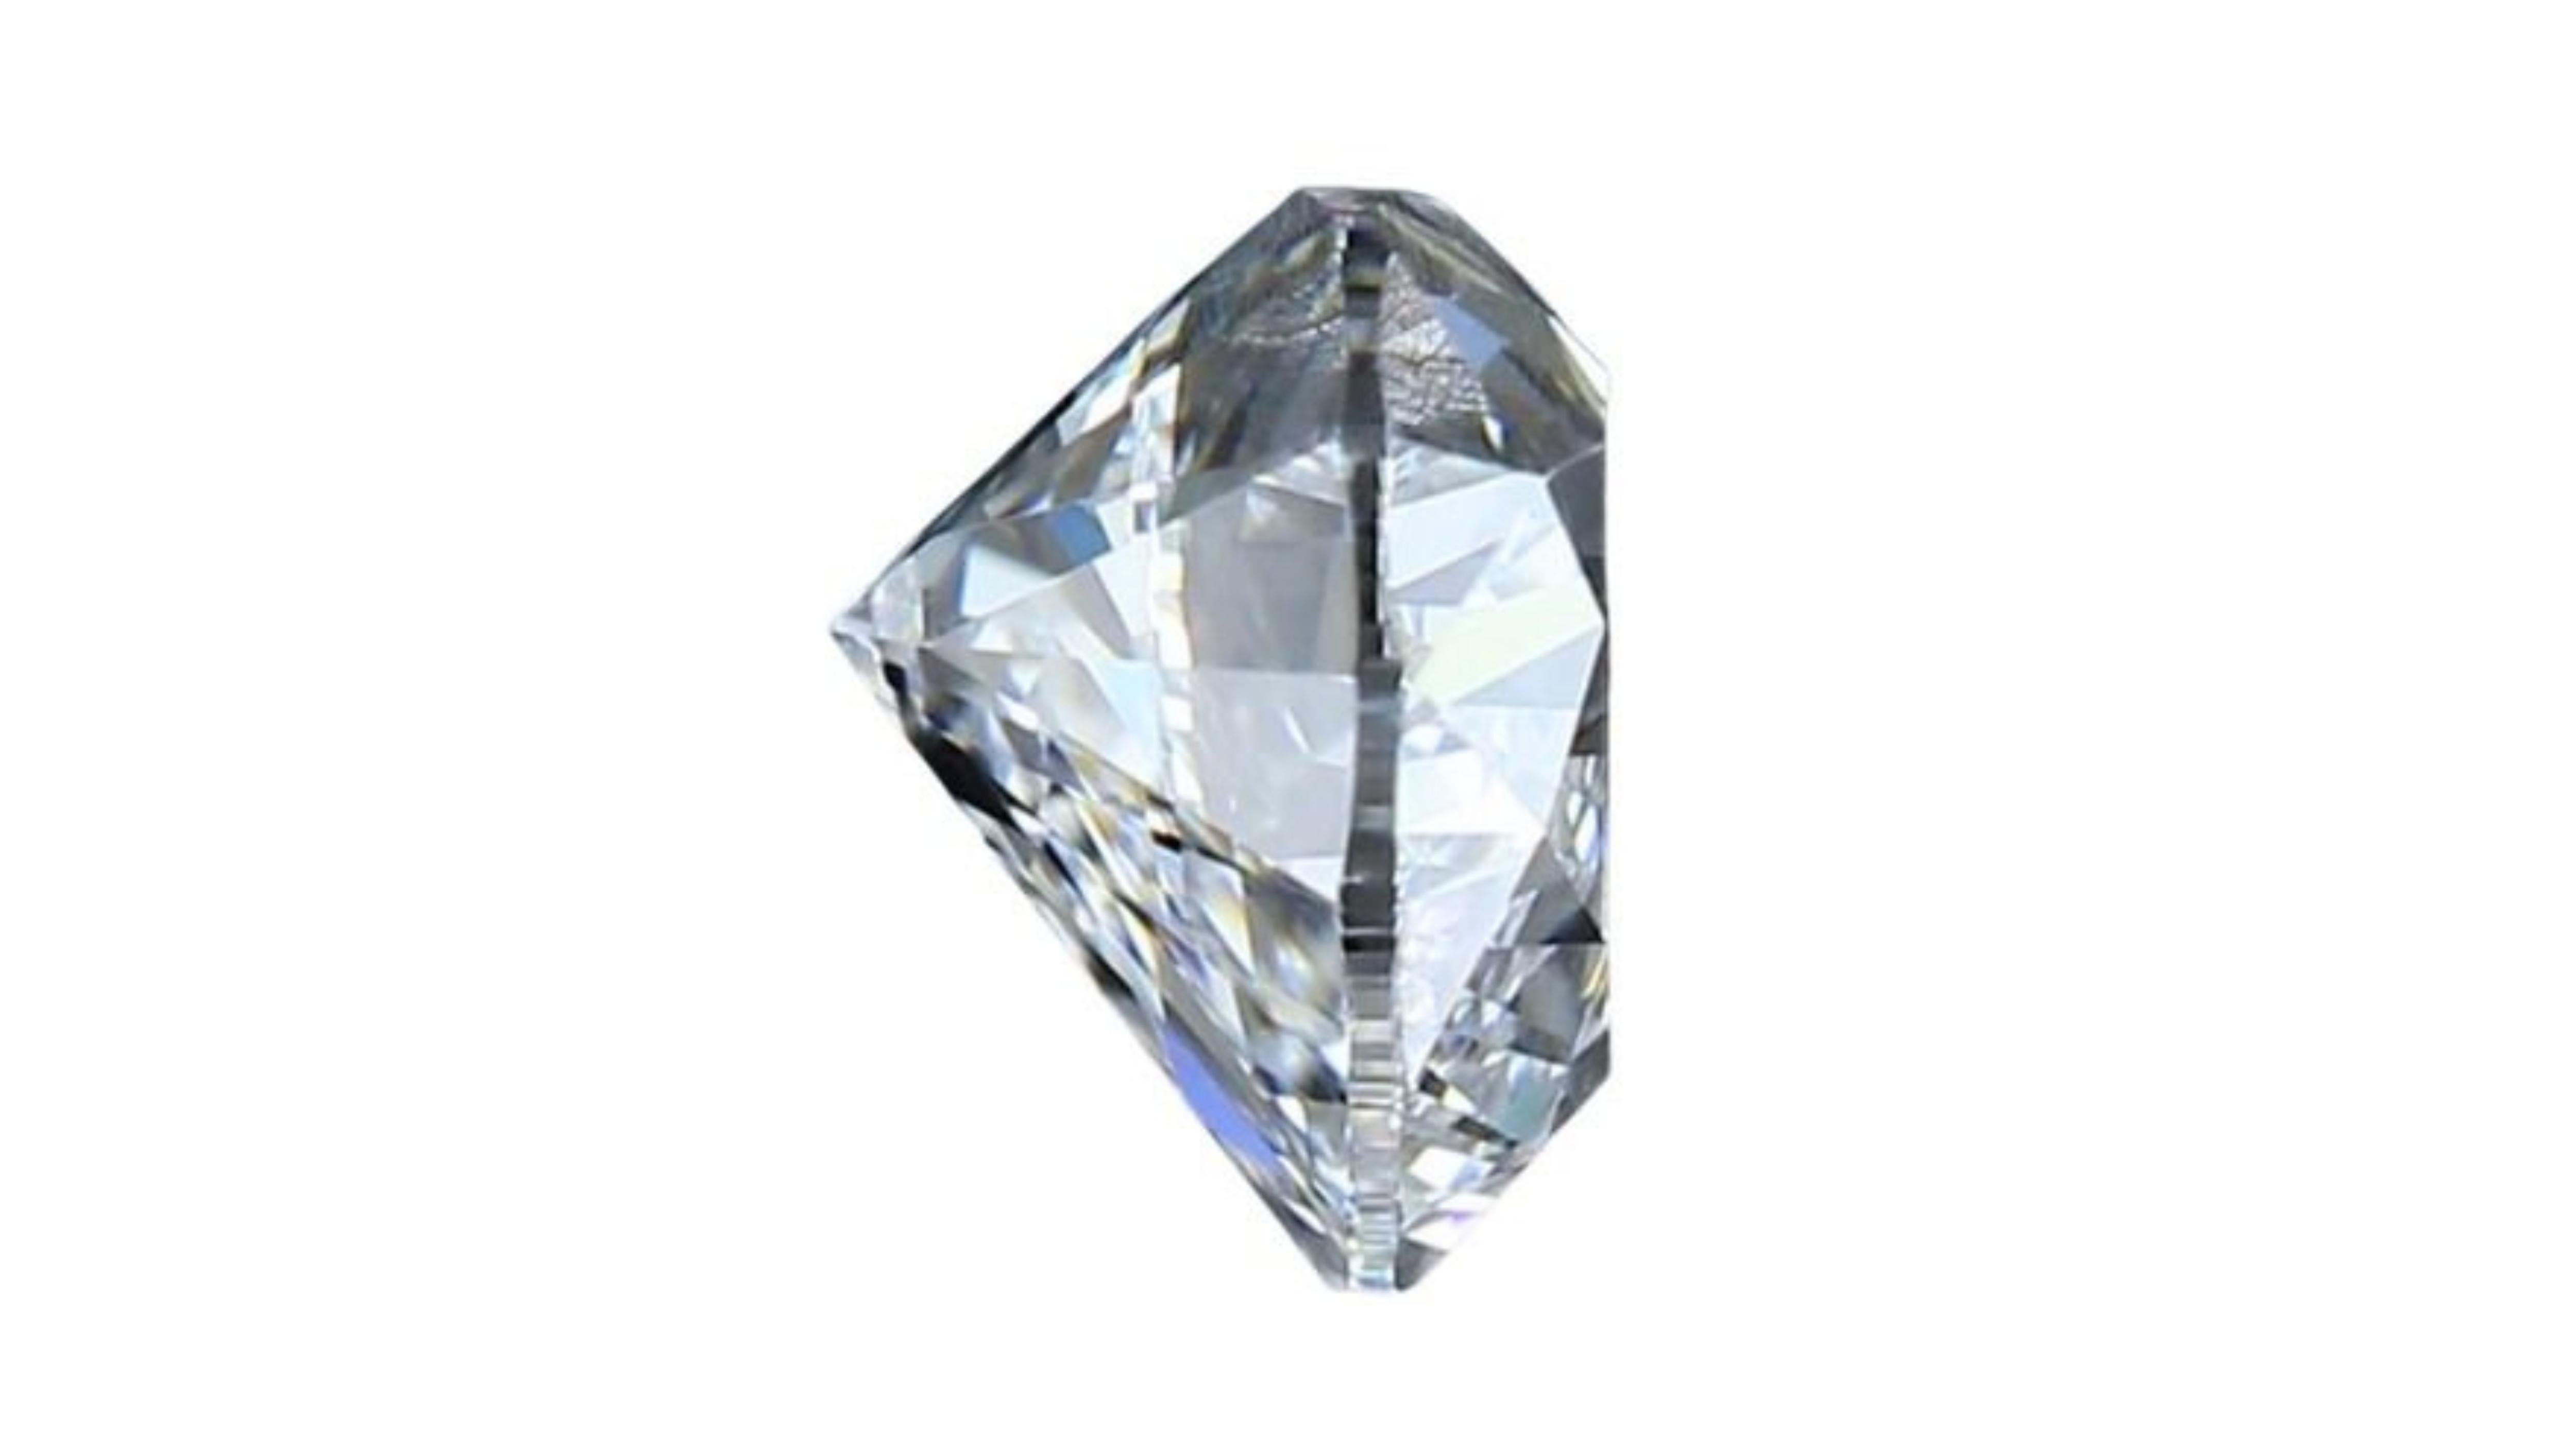 This stunning heart brilliant cut diamond is a rare and valuable gem. It is perfectly cut and polished to maximize its brilliance and sparkle. The color is D, the highest possible grade, and the clarity is VS1, meaning that it has very few